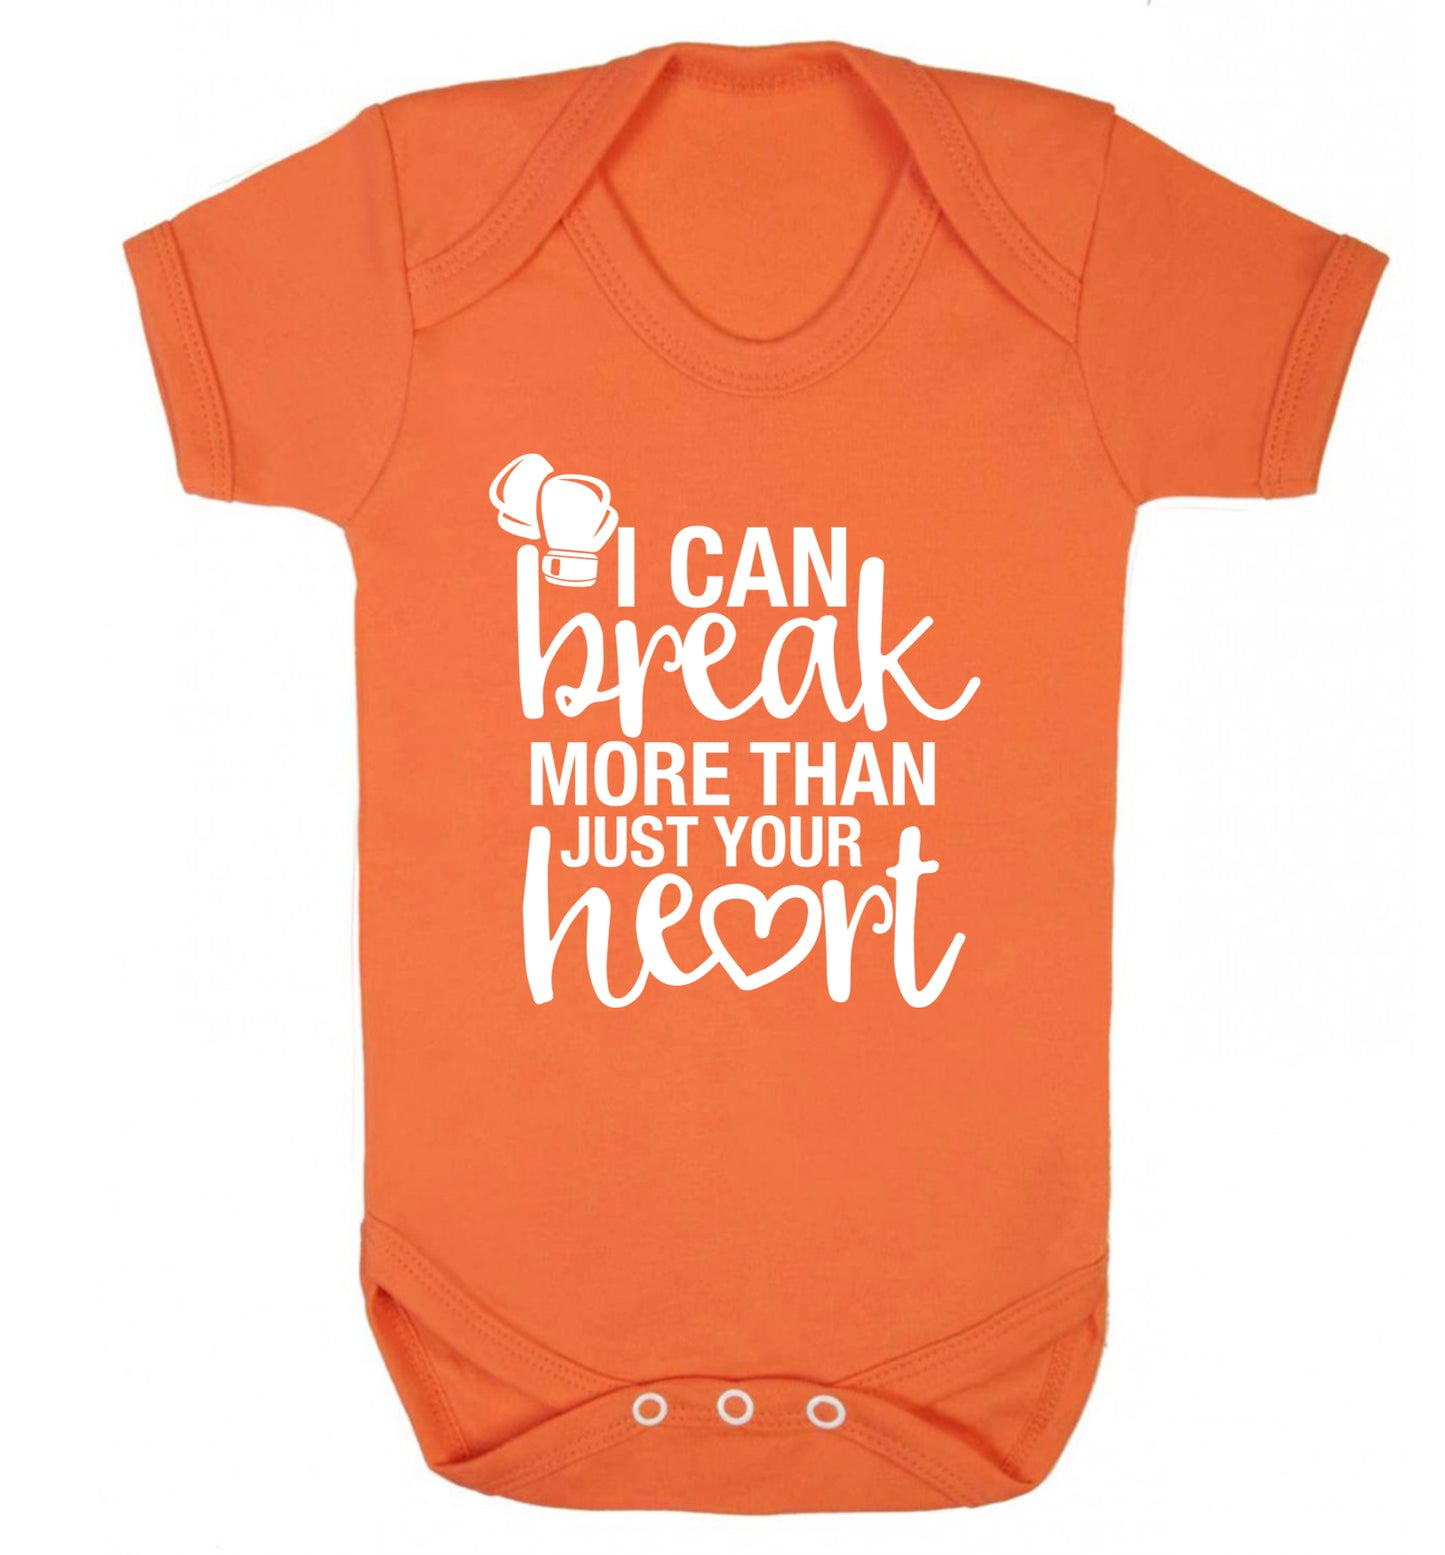 I can break more than just your heart Baby Vest orange 18-24 months